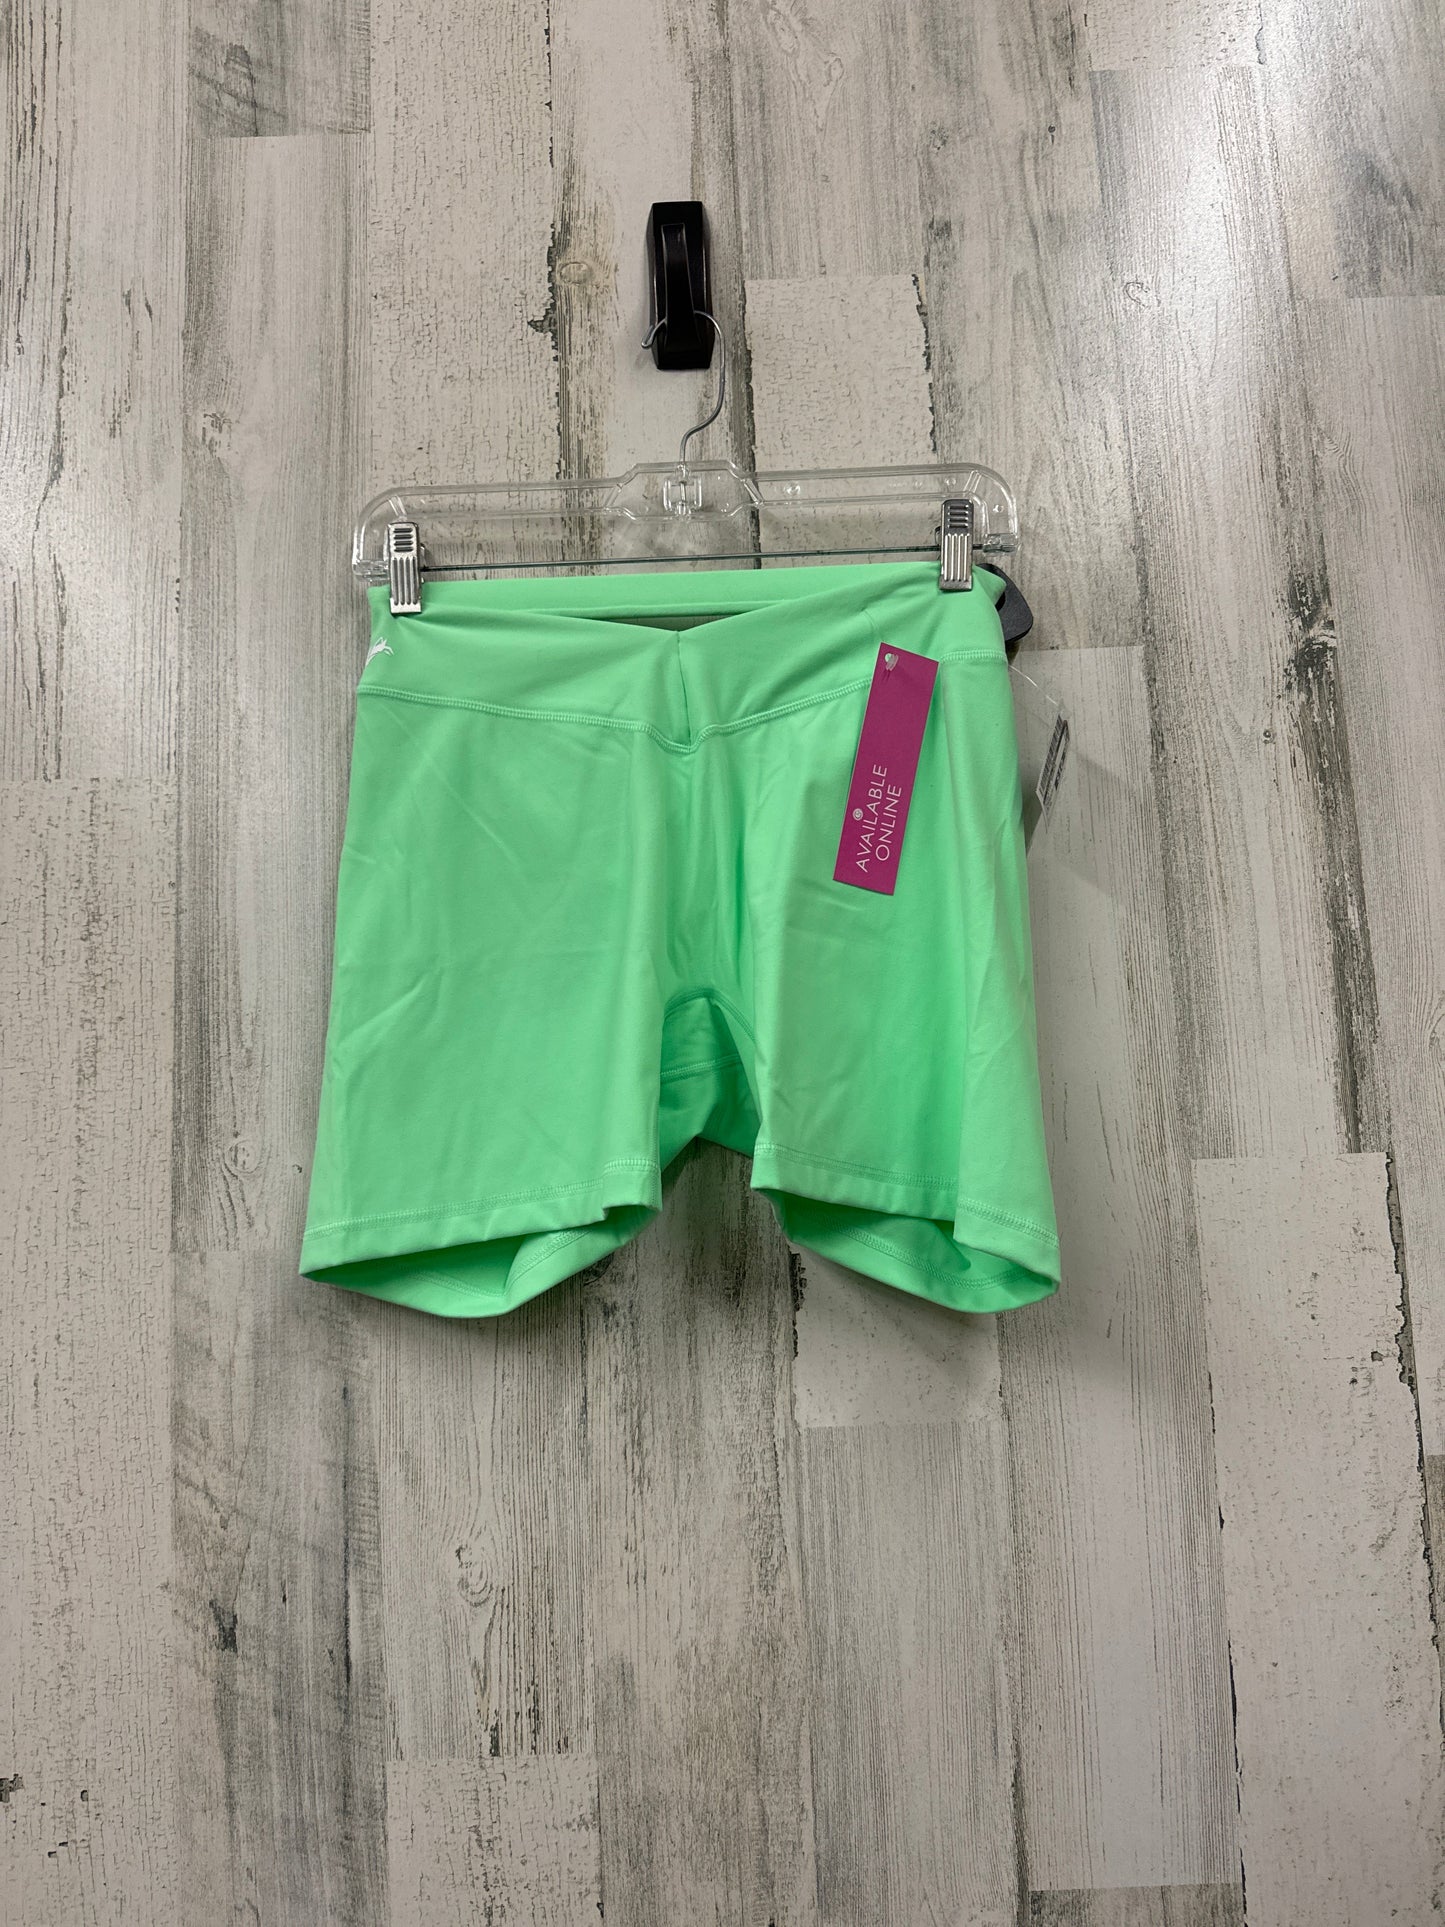 Green Athletic Shorts Clothes Mentor, Size Xl